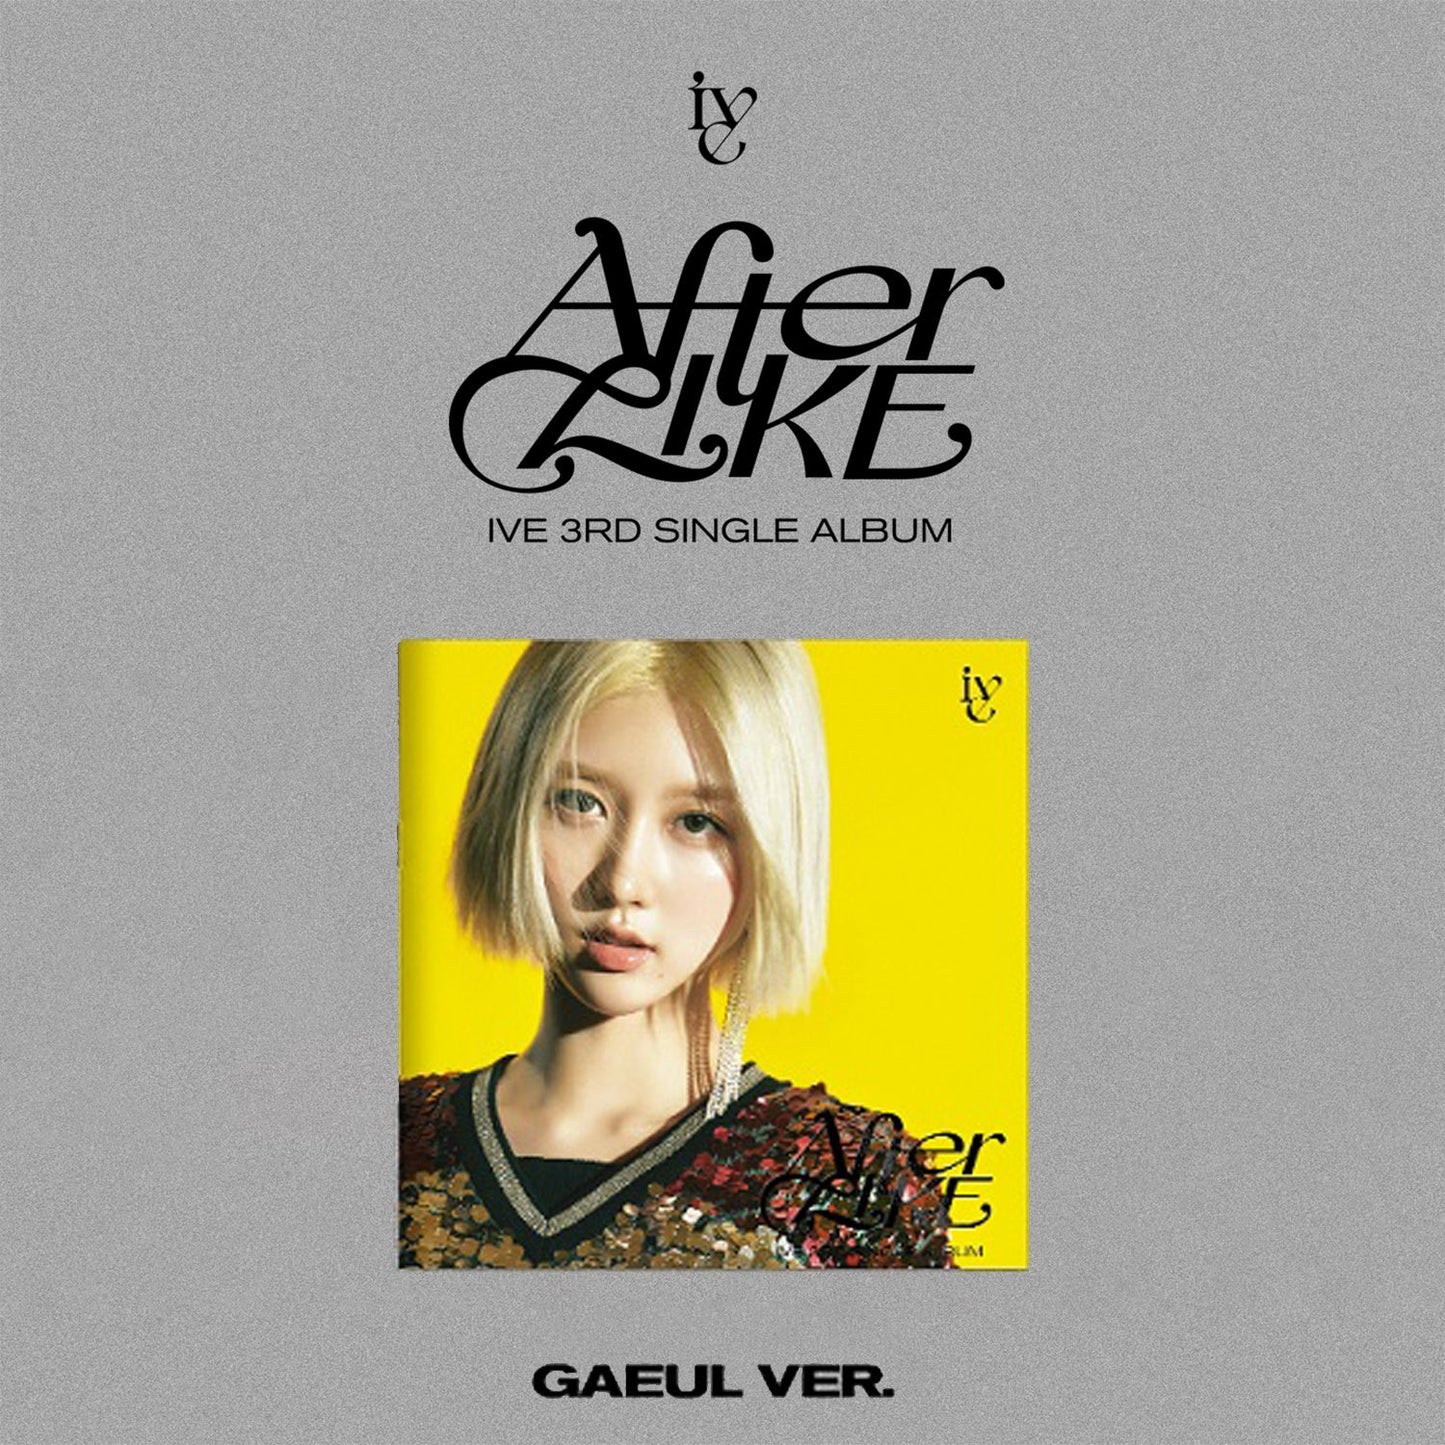 IVE 3RD SINGLE ALBUM 'AFTER LIKE' (JEWEL) GAEUL VERSION COVER